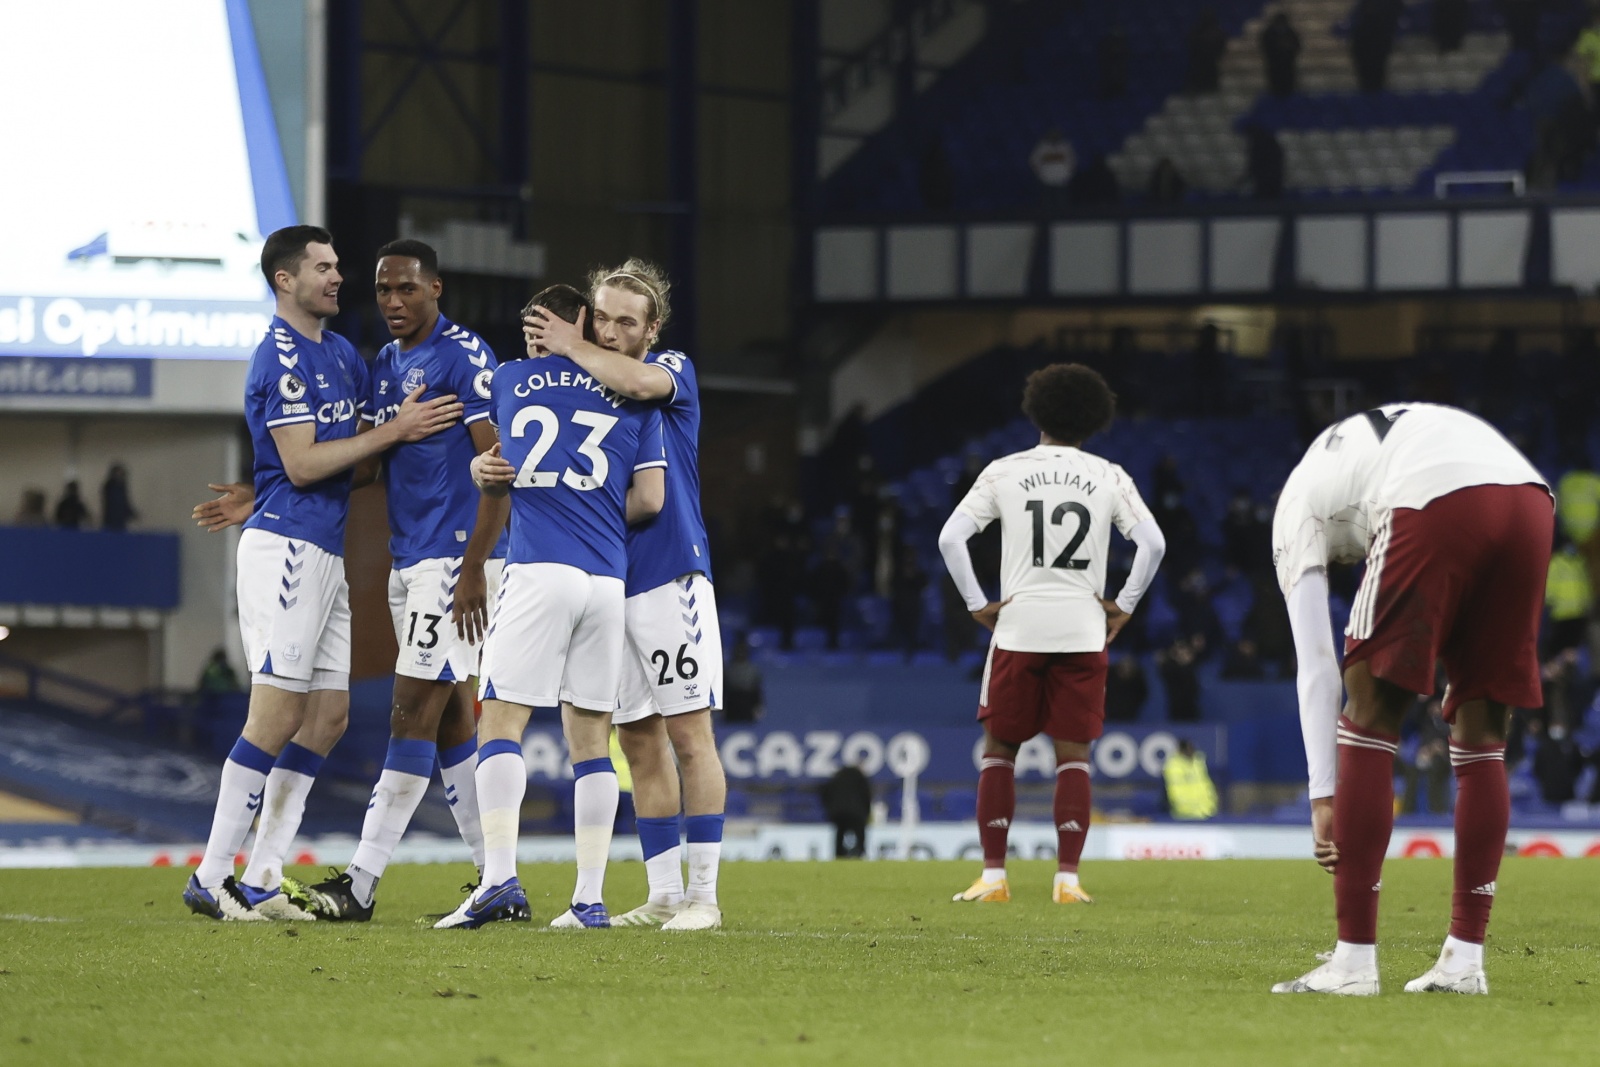 Everton escalate Arsenal crisis and climb to second in 'Premier League'